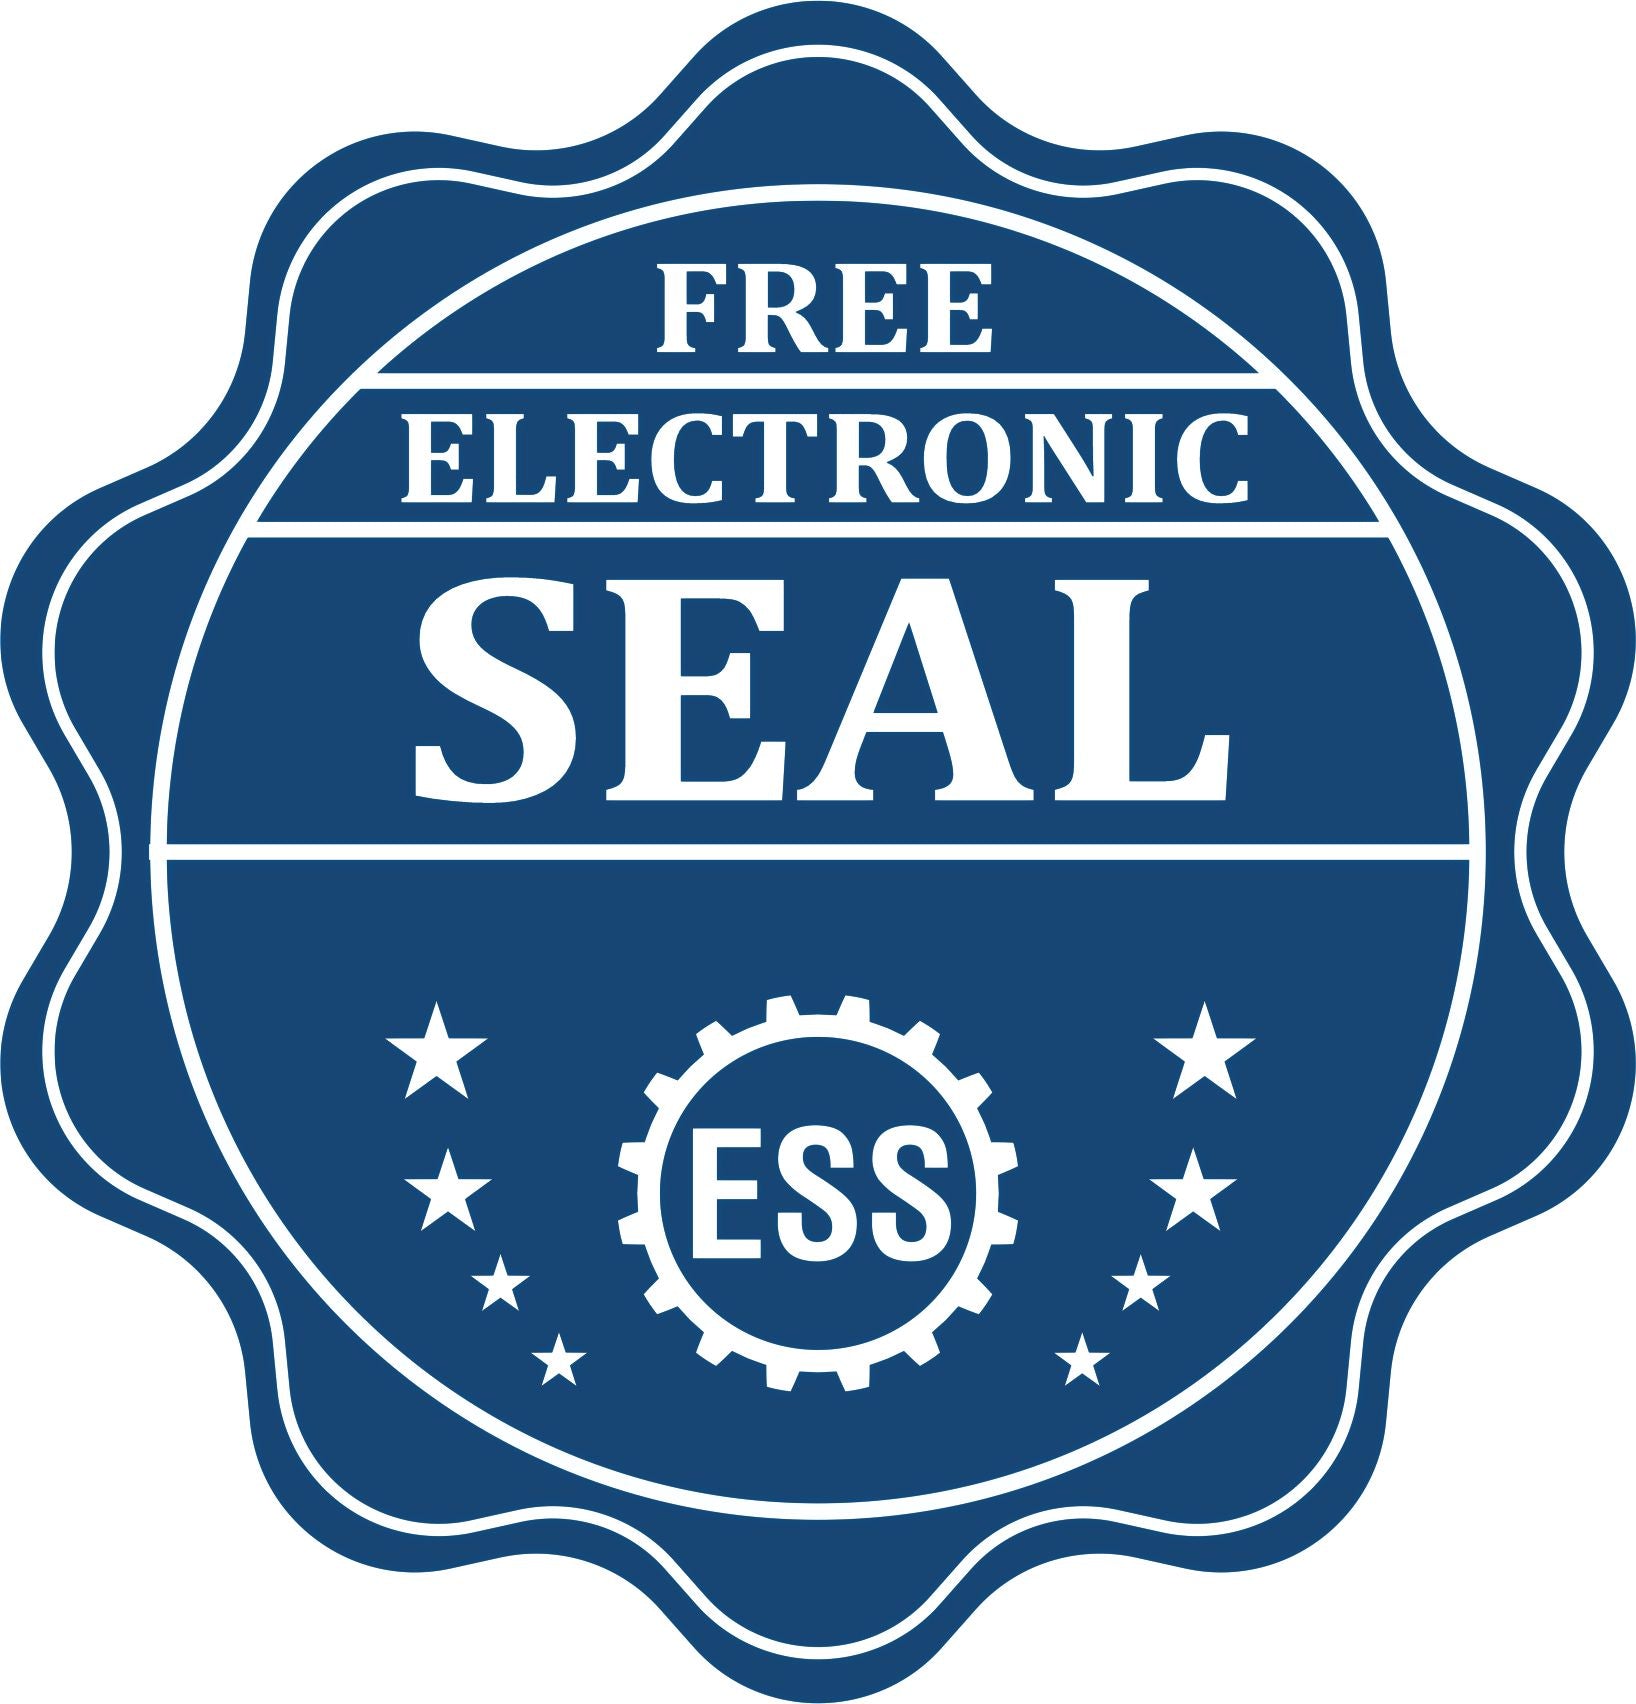 A badge showing a free electronic seal for the Wooden Handle Mississippi State Seal Notary Public Stamp with stars and the ESS gear on the emblem.